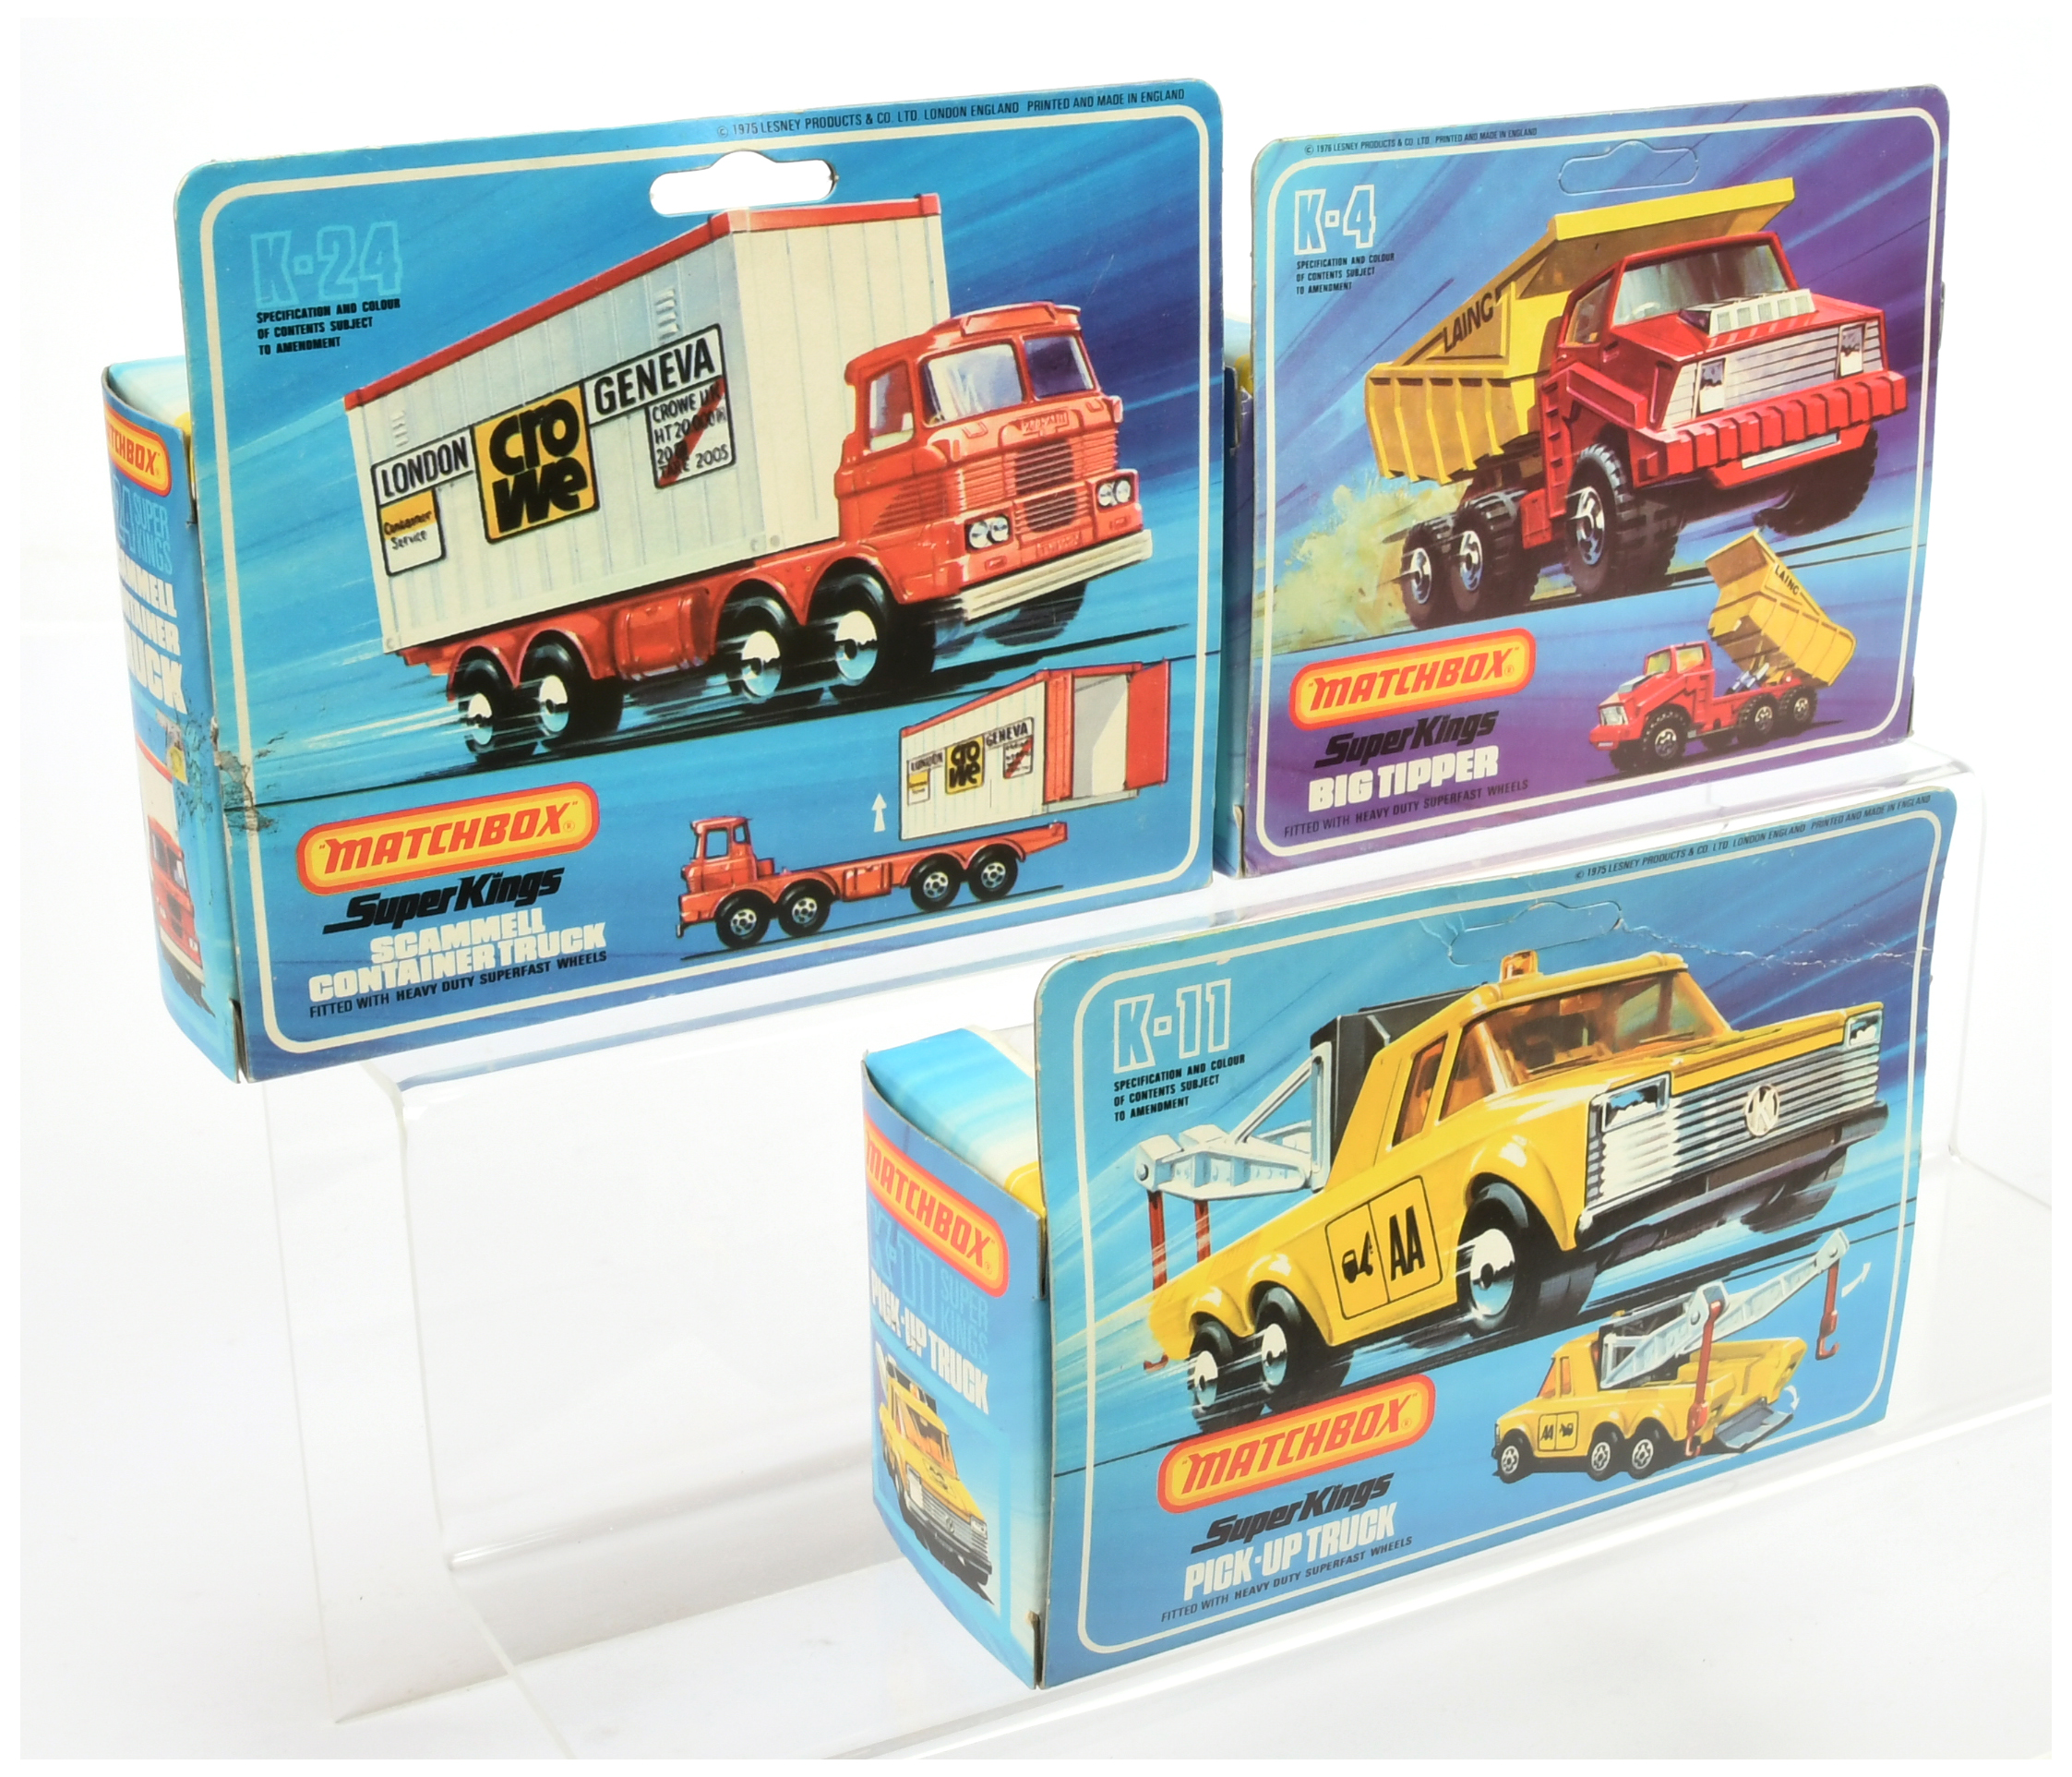 Matchbox Superkings  A Group 3 To Include (1) K4 Tipper Truck "Laing" - Red and yellow, (2) K11 P... - Image 2 of 2